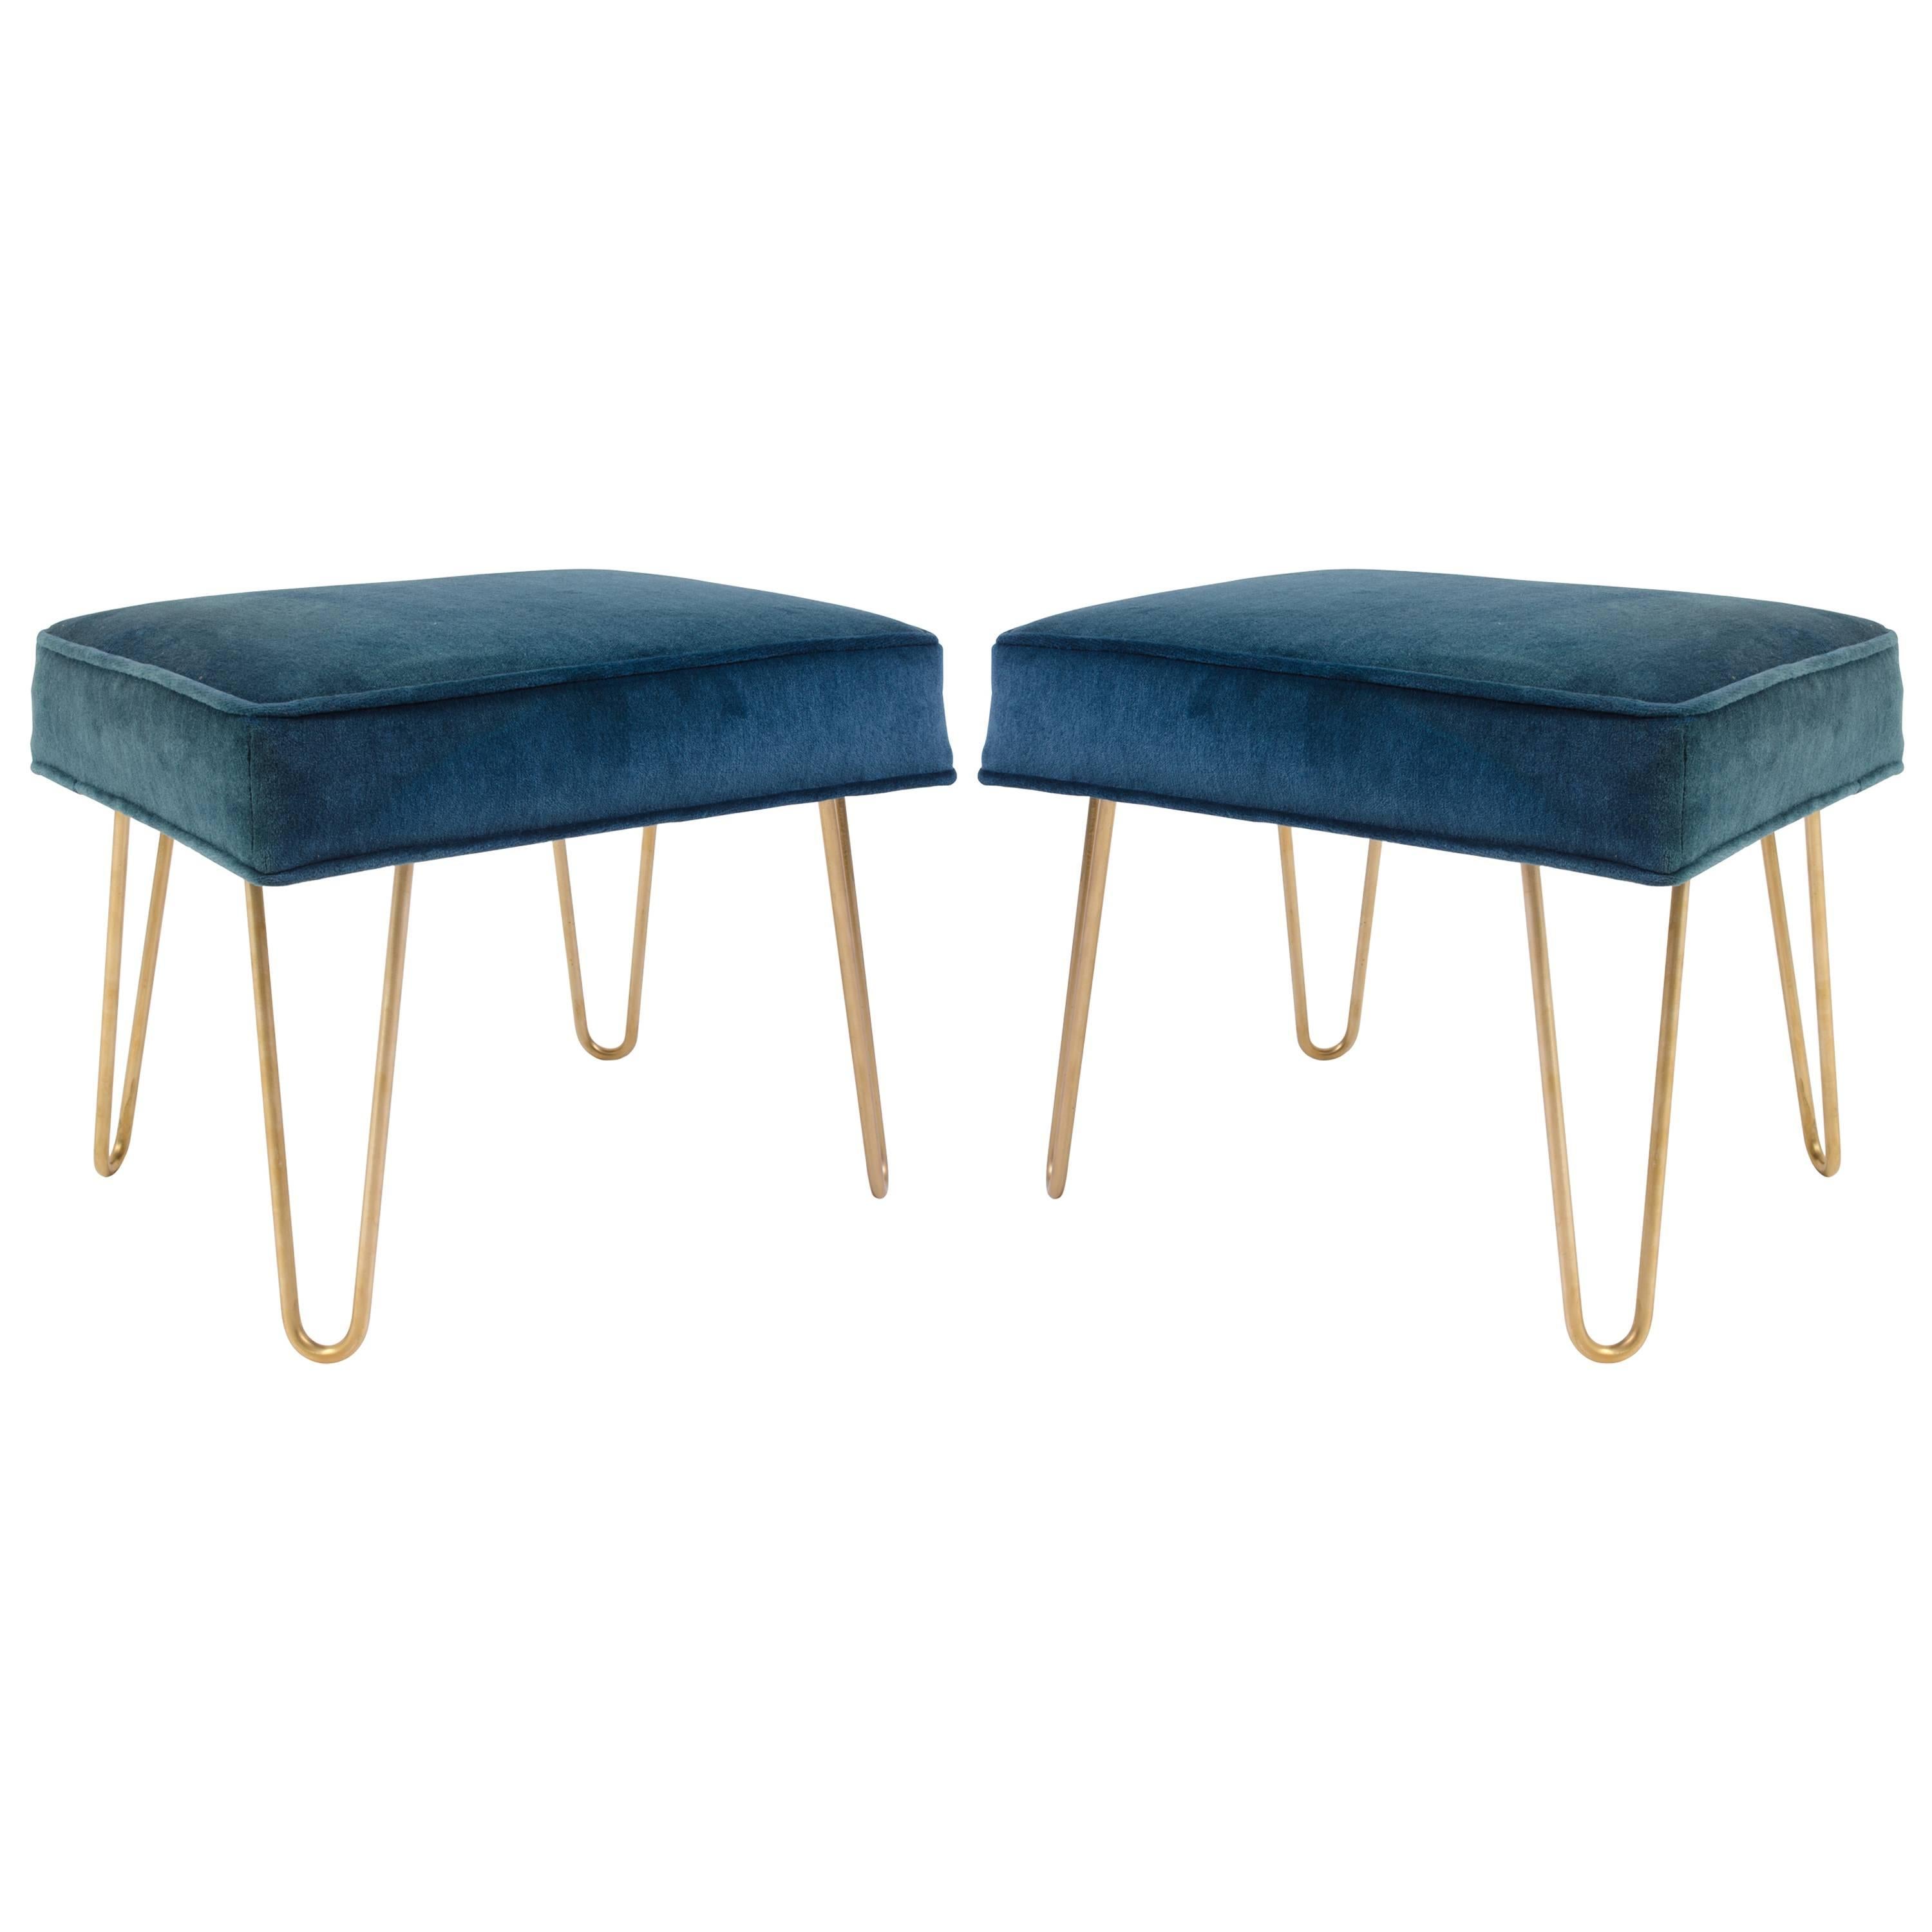 Petite Brass Hairpin Ottomans in Teal Velvet by Montage